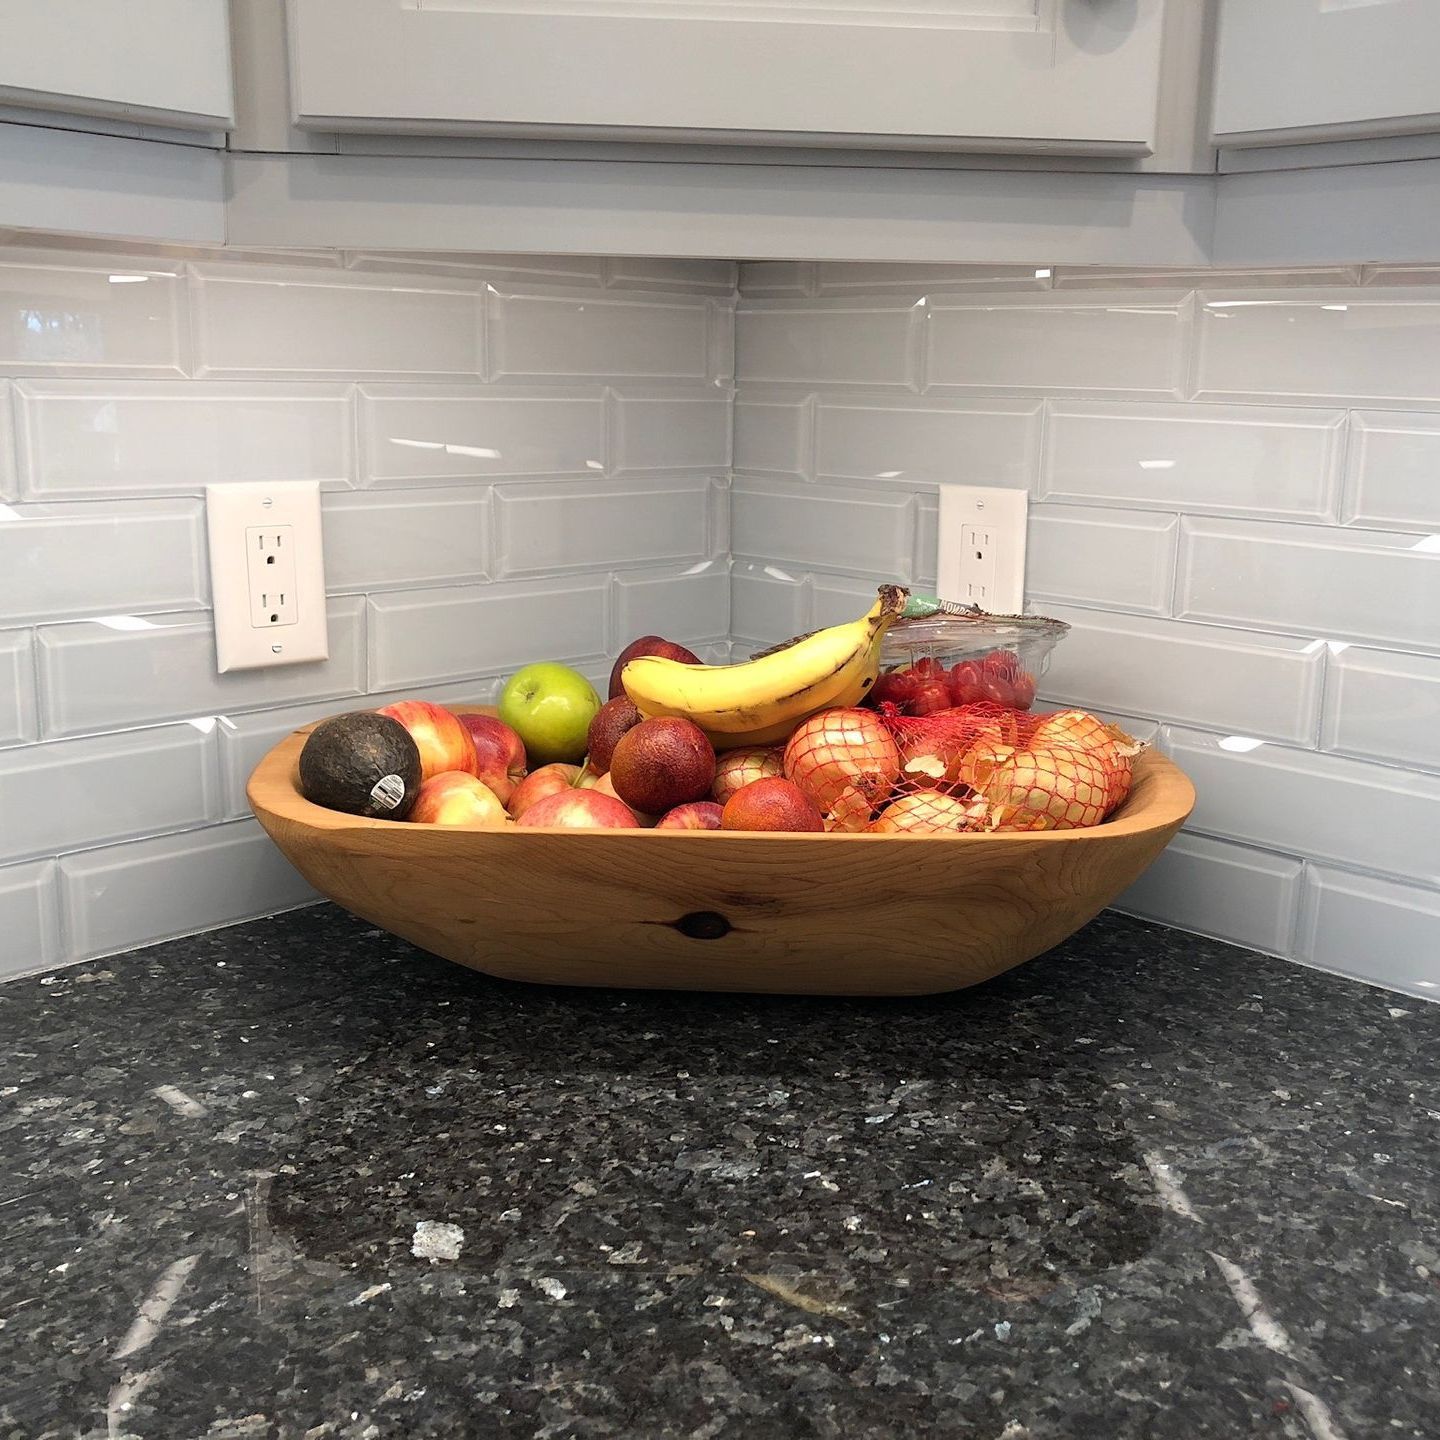 A wooden bowl filled with fruit and vegetables on a counter.